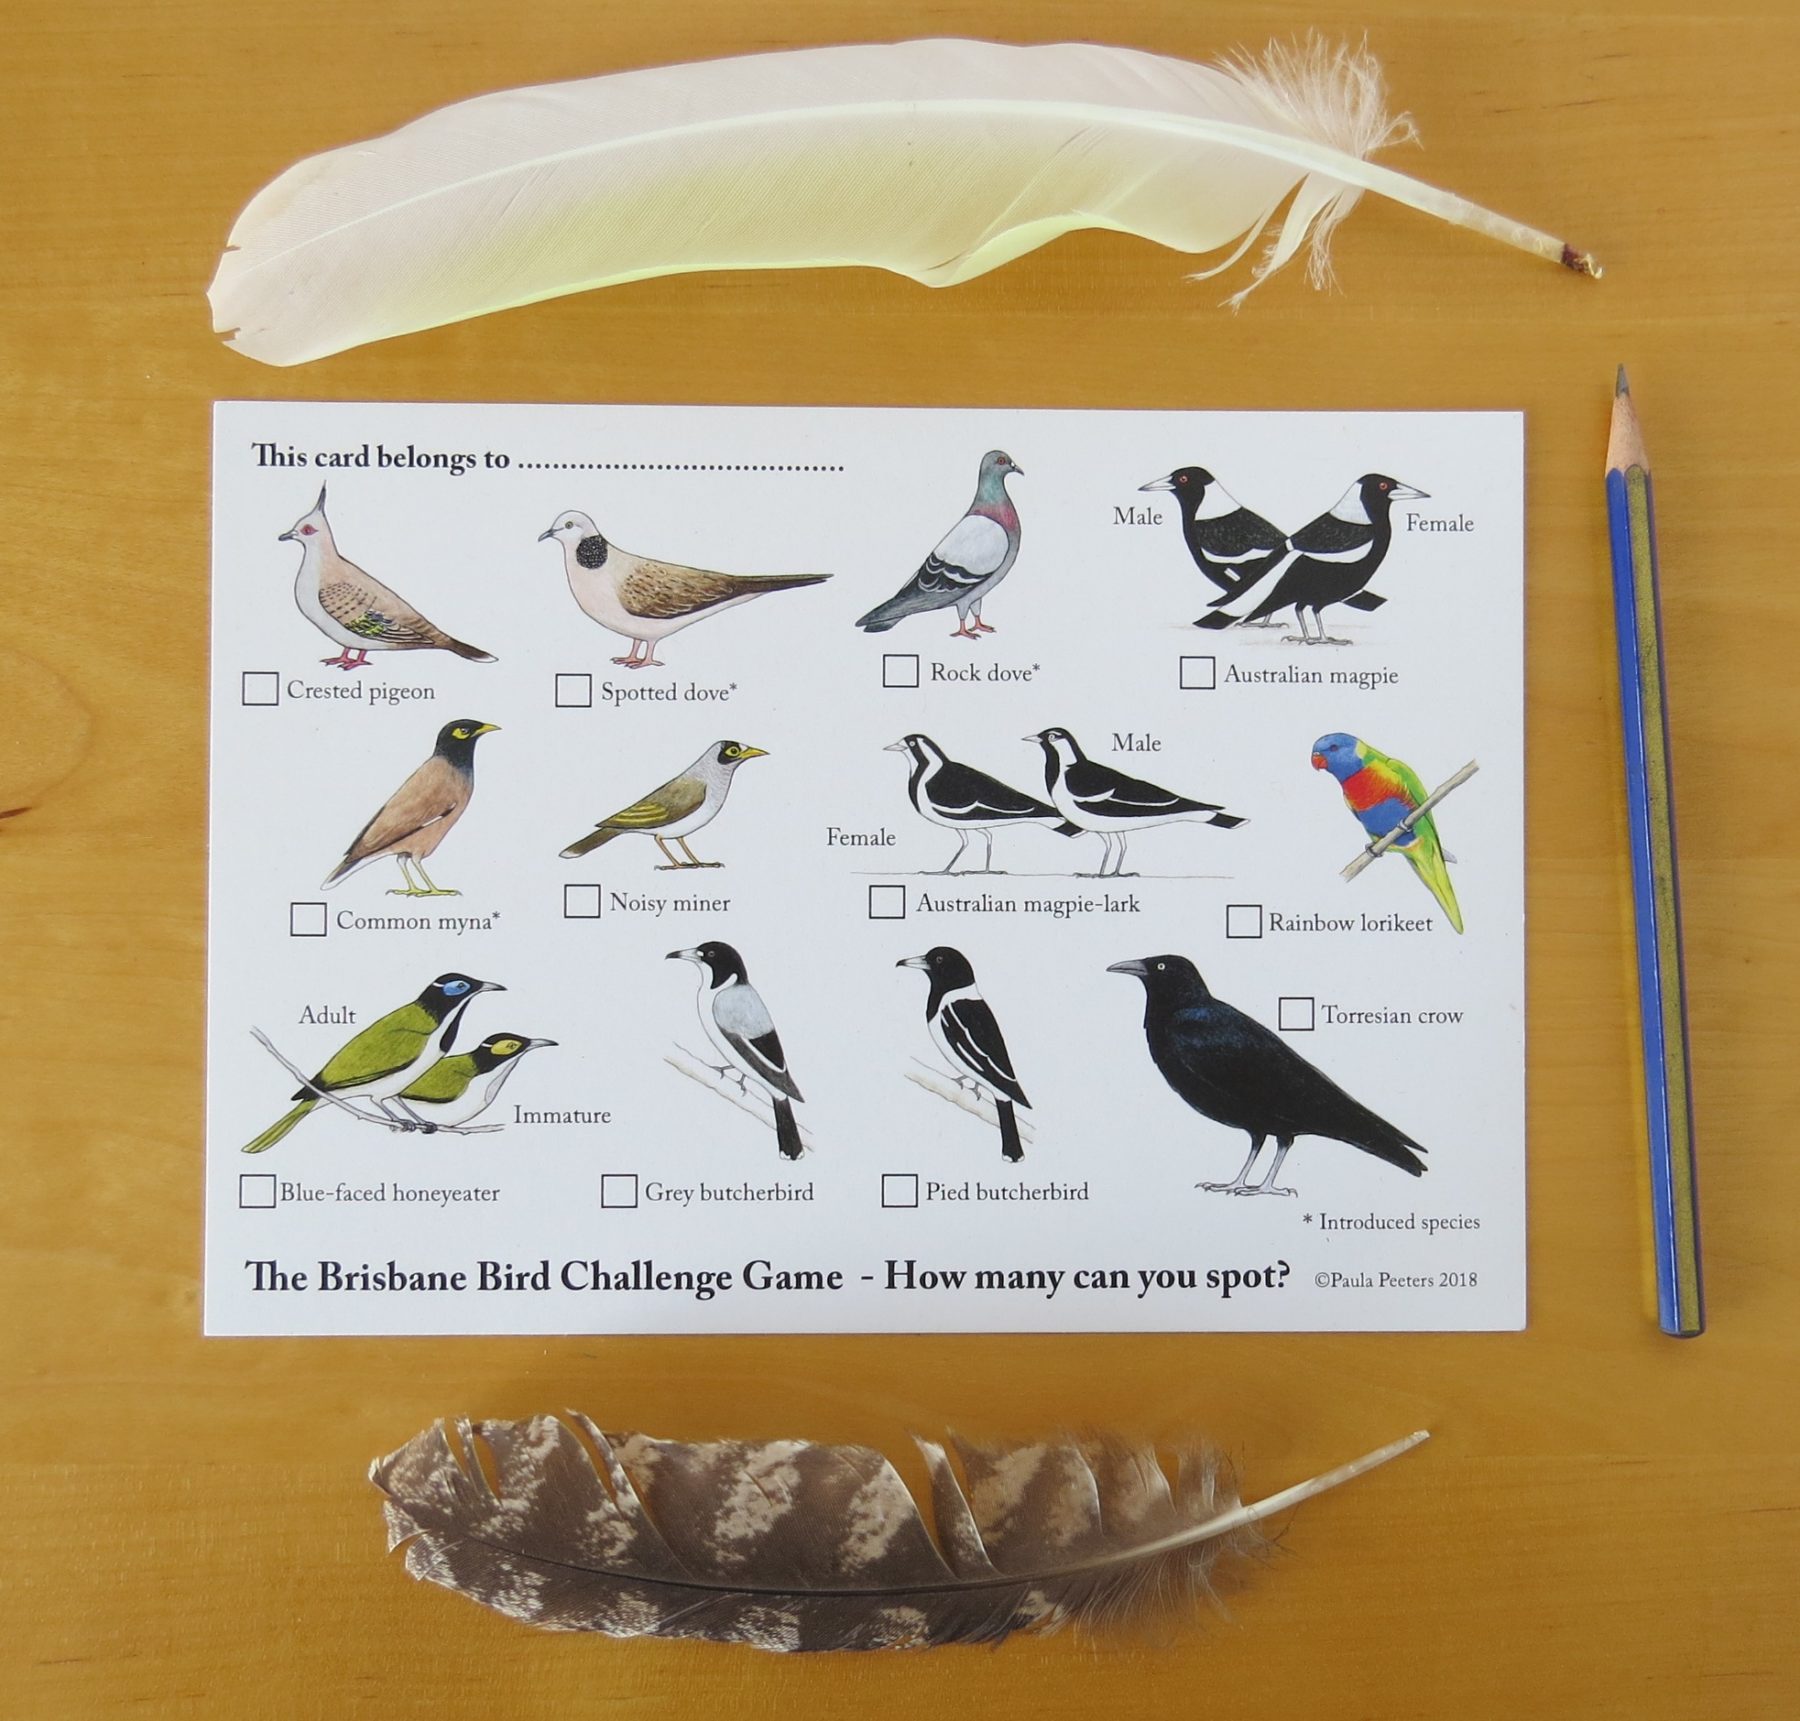 a photo of a card showing different bird species